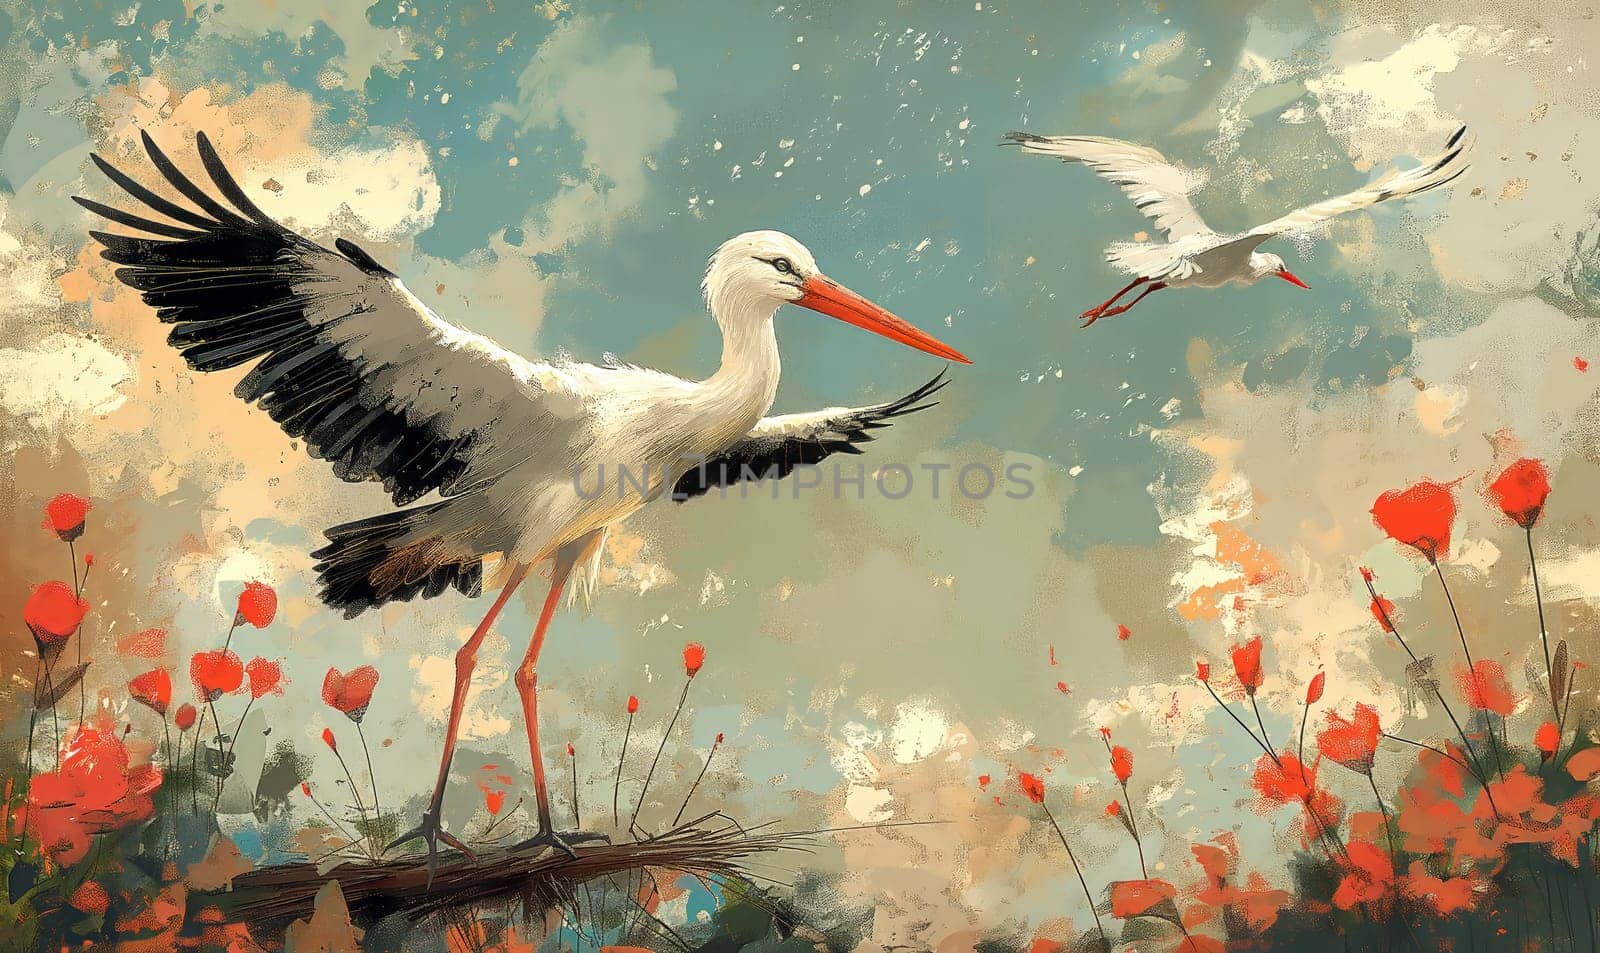 Illustration of a stork on a natural background. by Fischeron